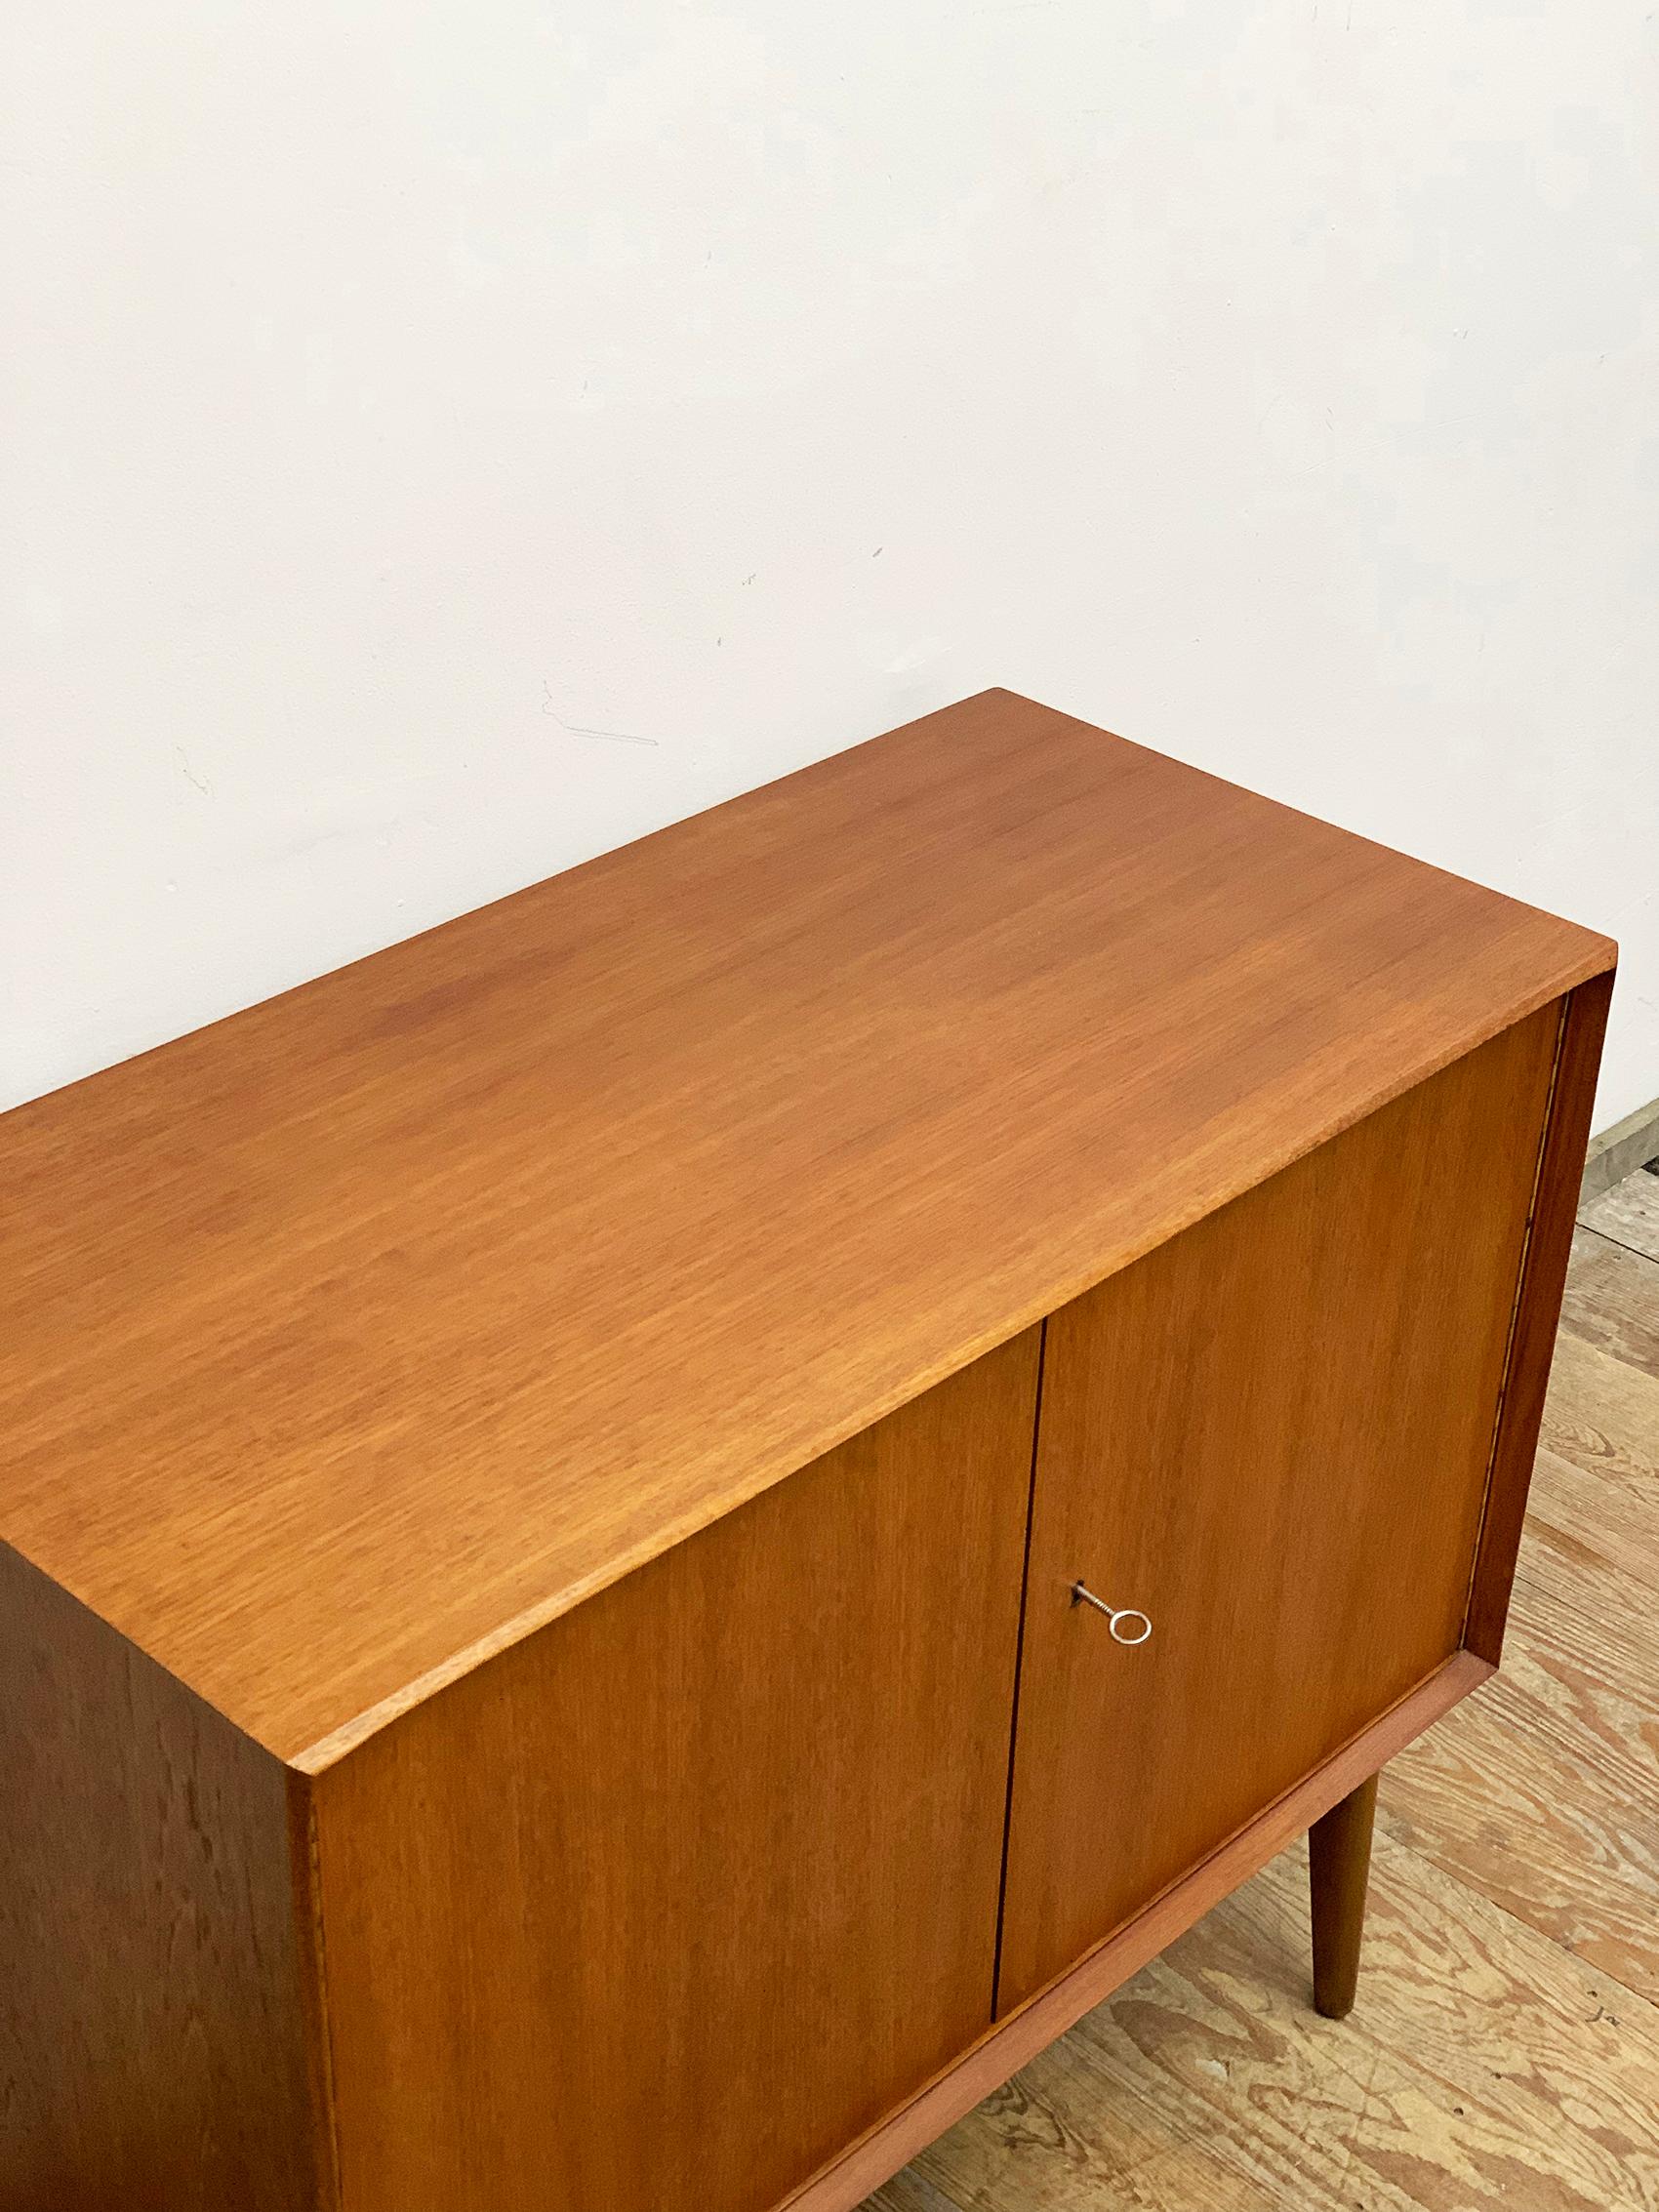 Small Mid-Century Sideboard in Teak by Rex Raab for Wilhelm Renz, Germany, 1960s For Sale 1